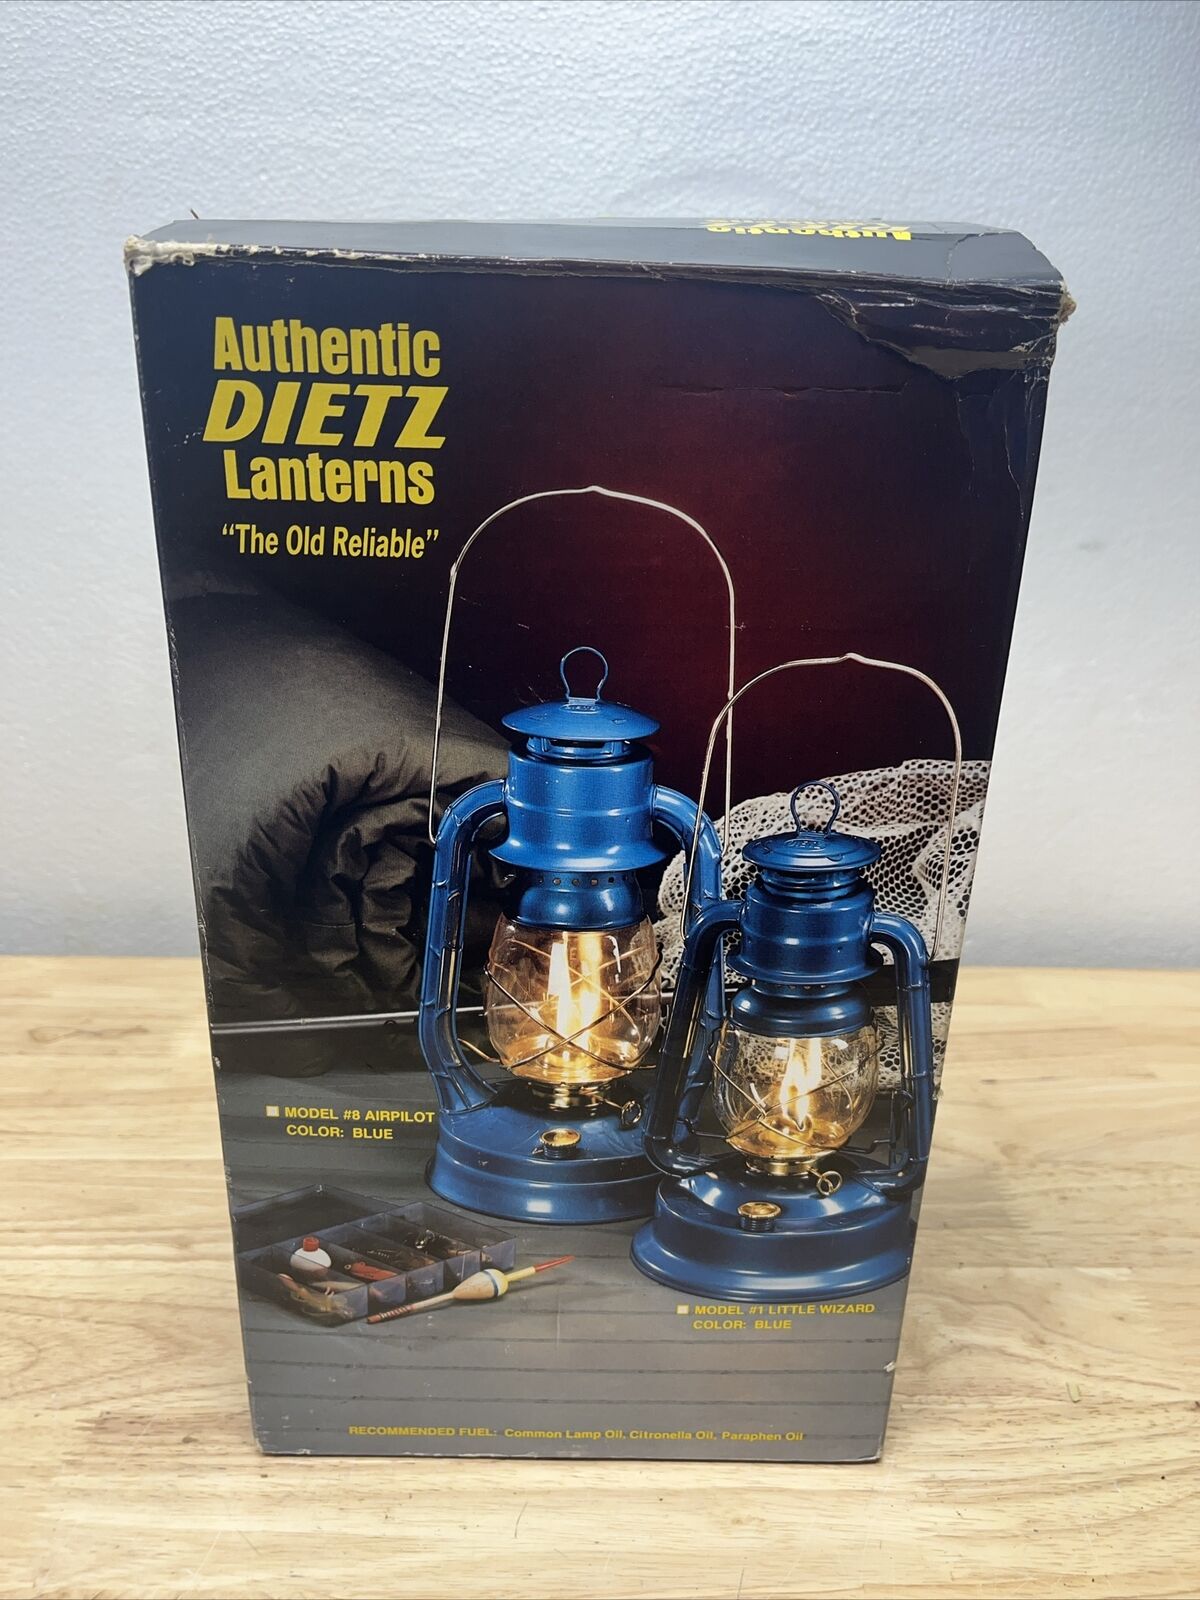 Authentic Vintage Dietz Lantern # 8 Airpilot Blue The Old Reliable New In Box